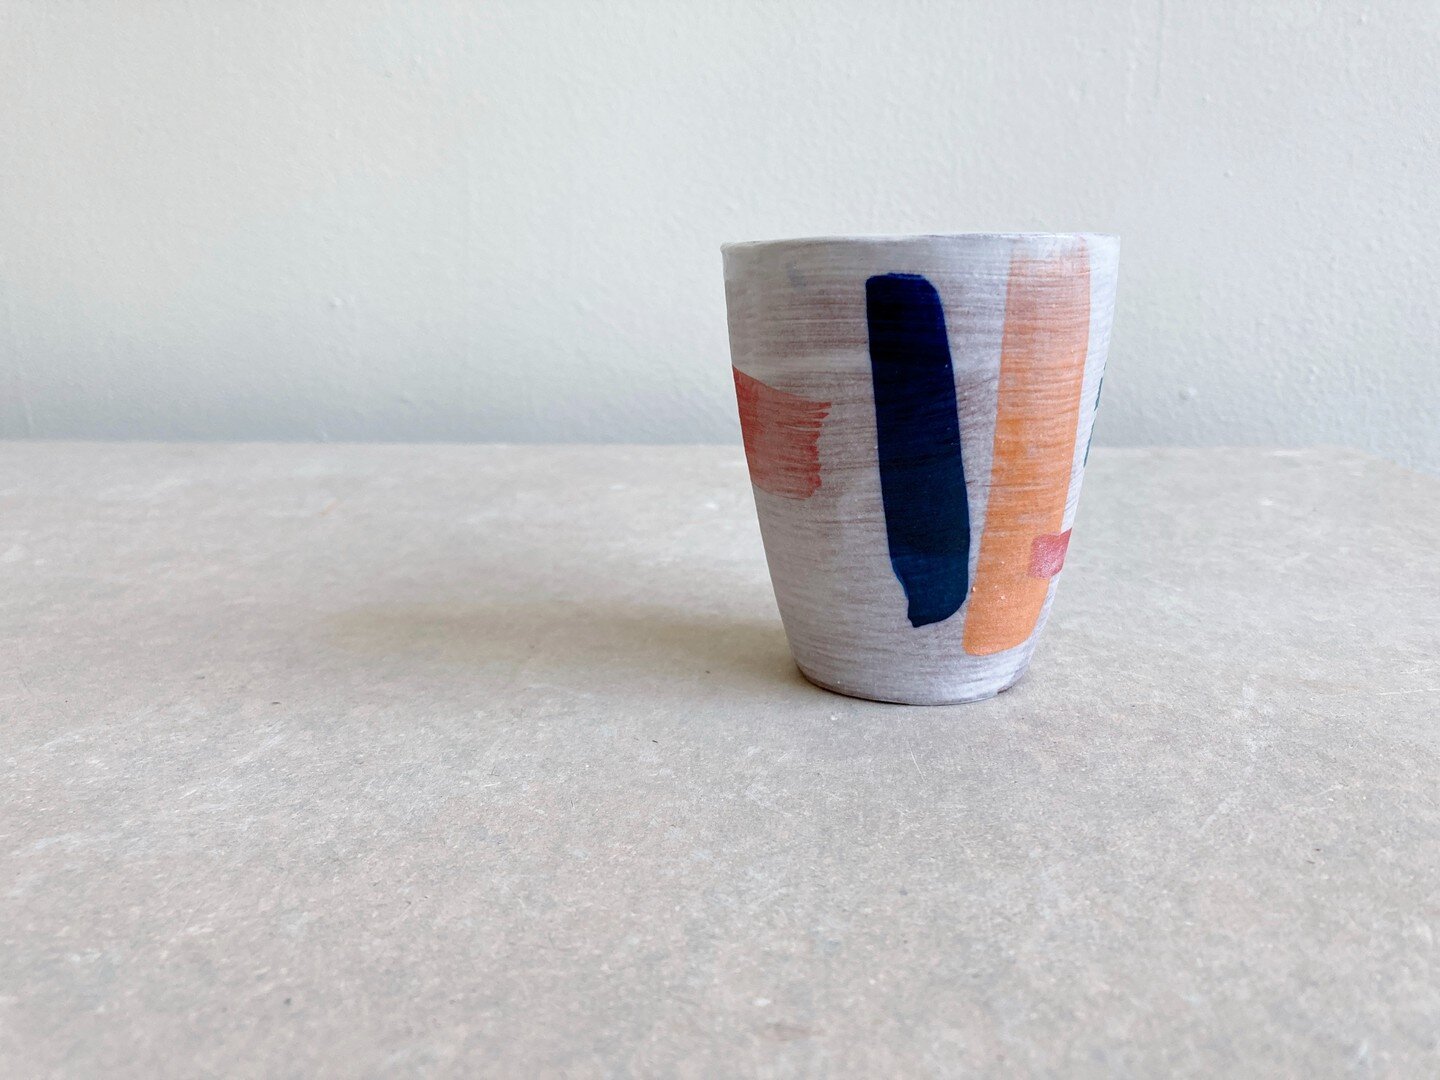 color palette piccolo cups, in the shop- see stories for more views. 8.3.22
.
.
.
#sculptureforyoureveryday #carnevale365 #cup #ceramic #ceramics #pottery #coilbuilt #annecarnevale #stoneware #chicago